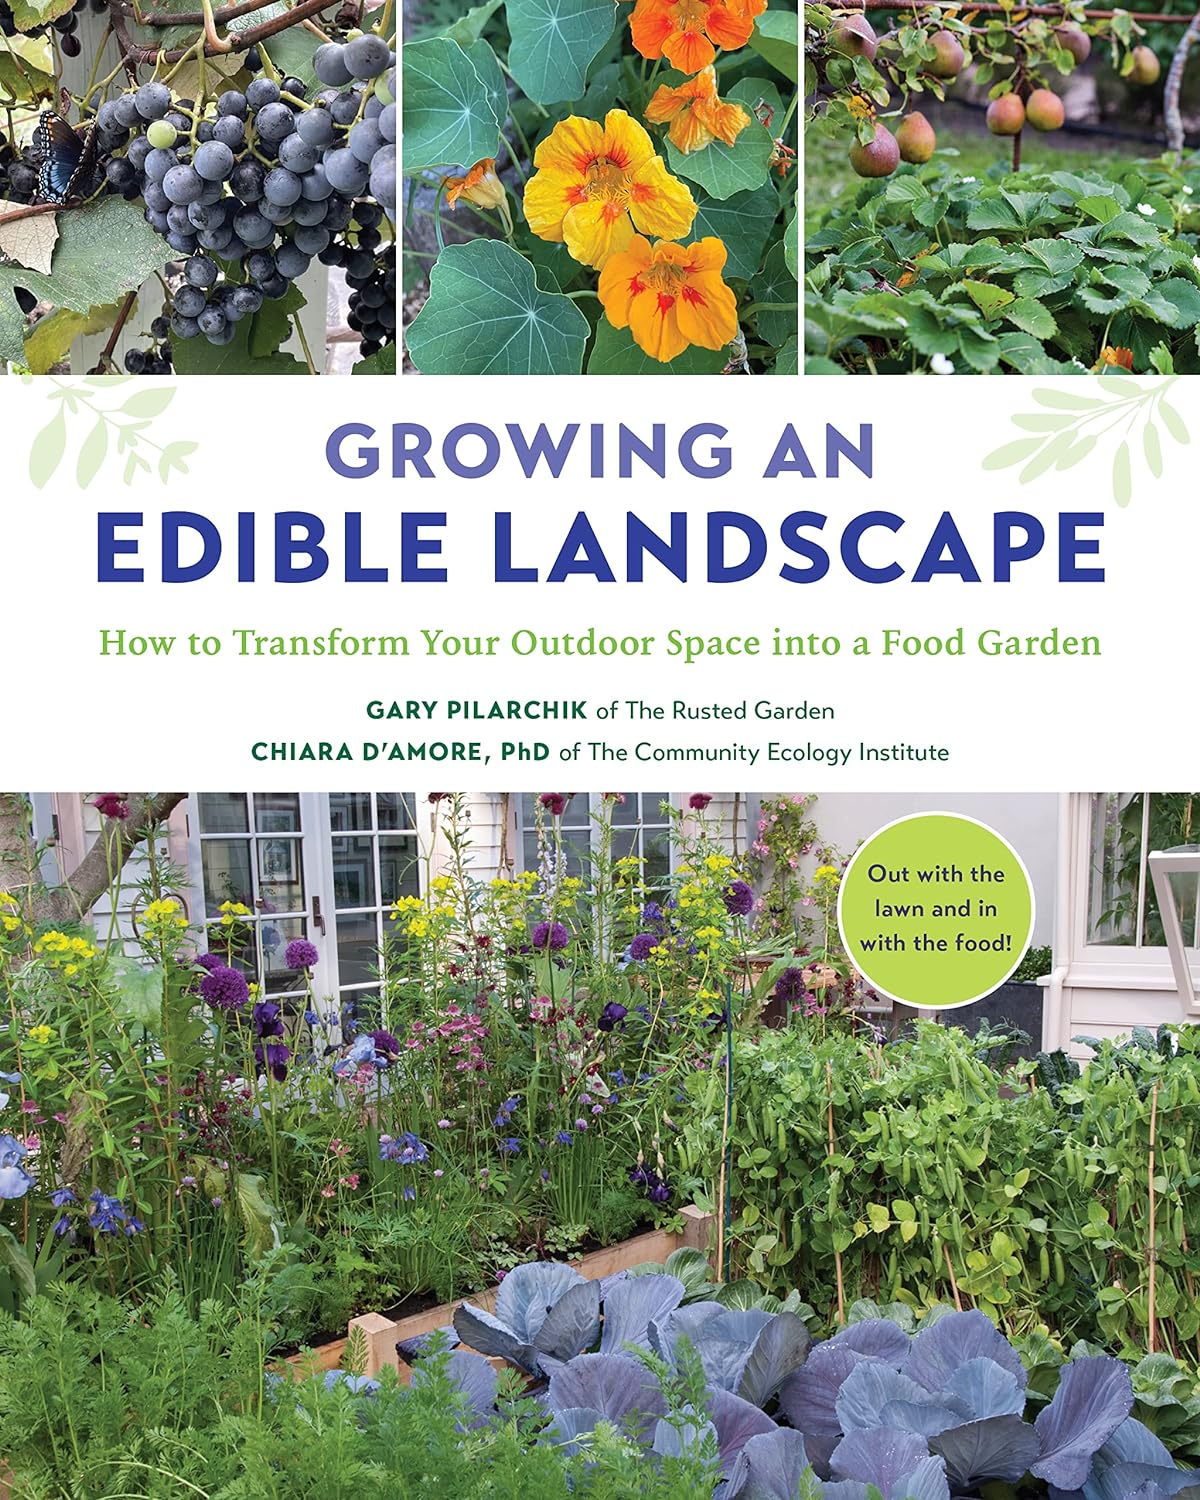 Photo of the book cover featuring the edible landscape.